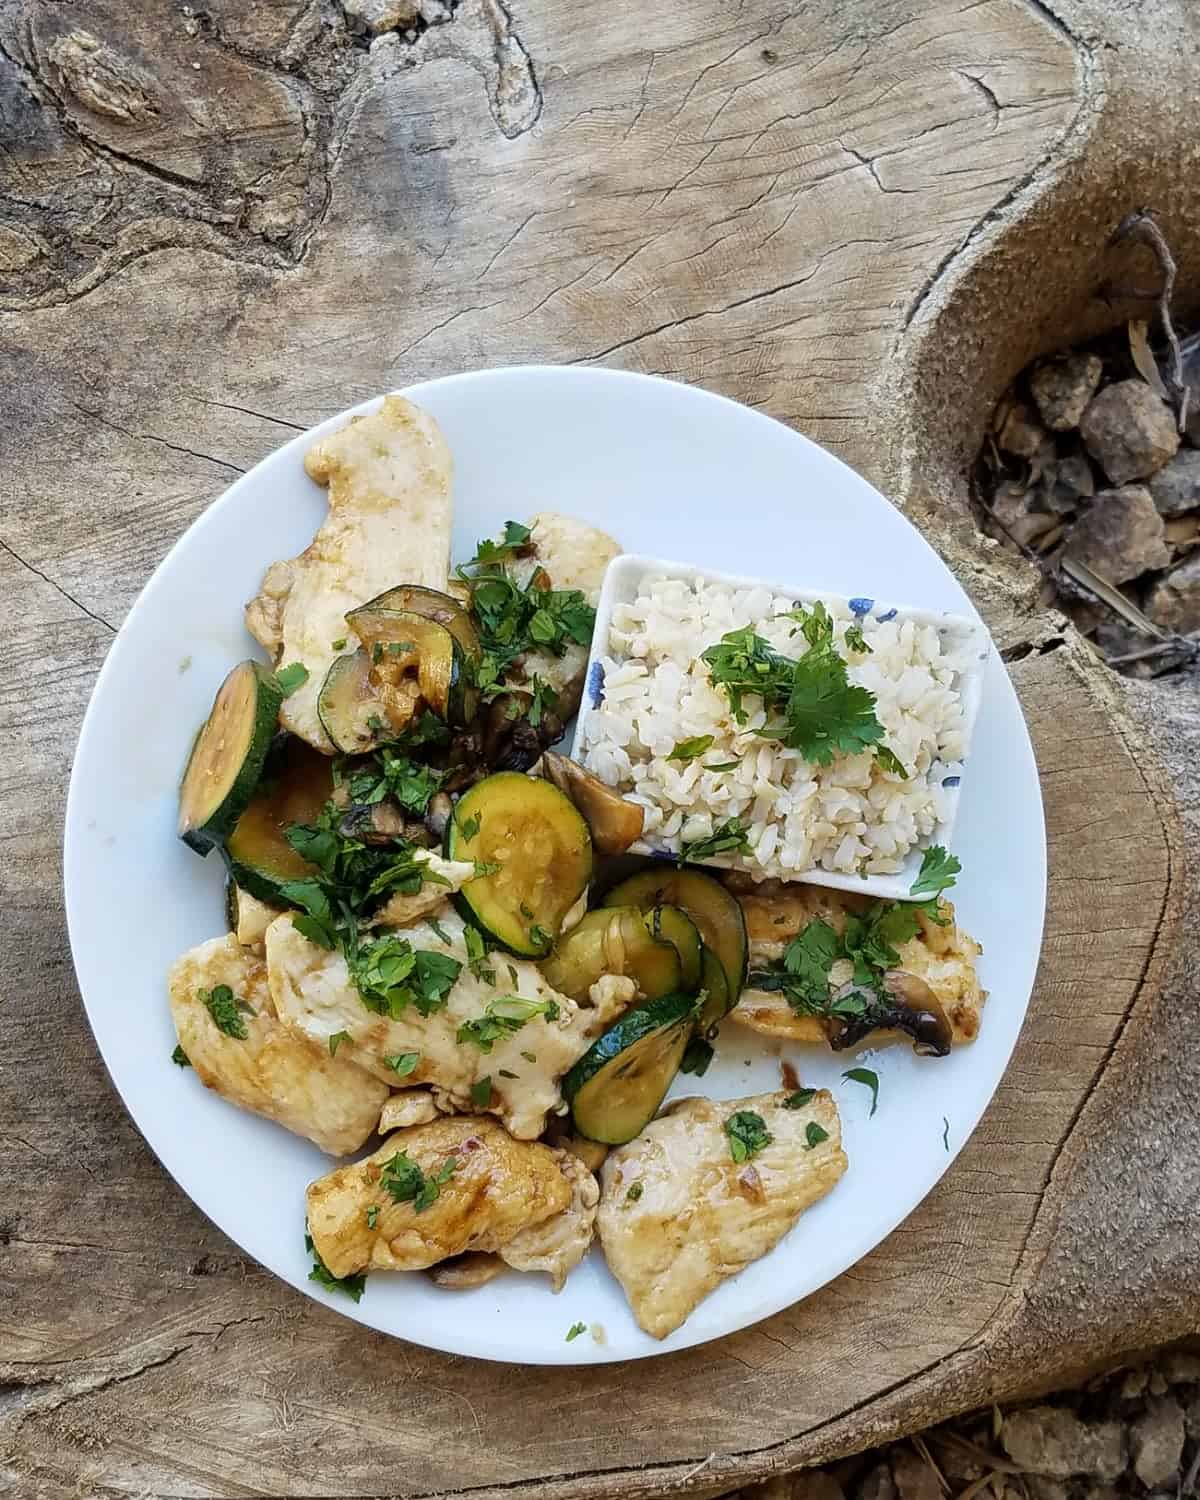 Stir-fried chicken, mushrooms and zucchini with side of rice.